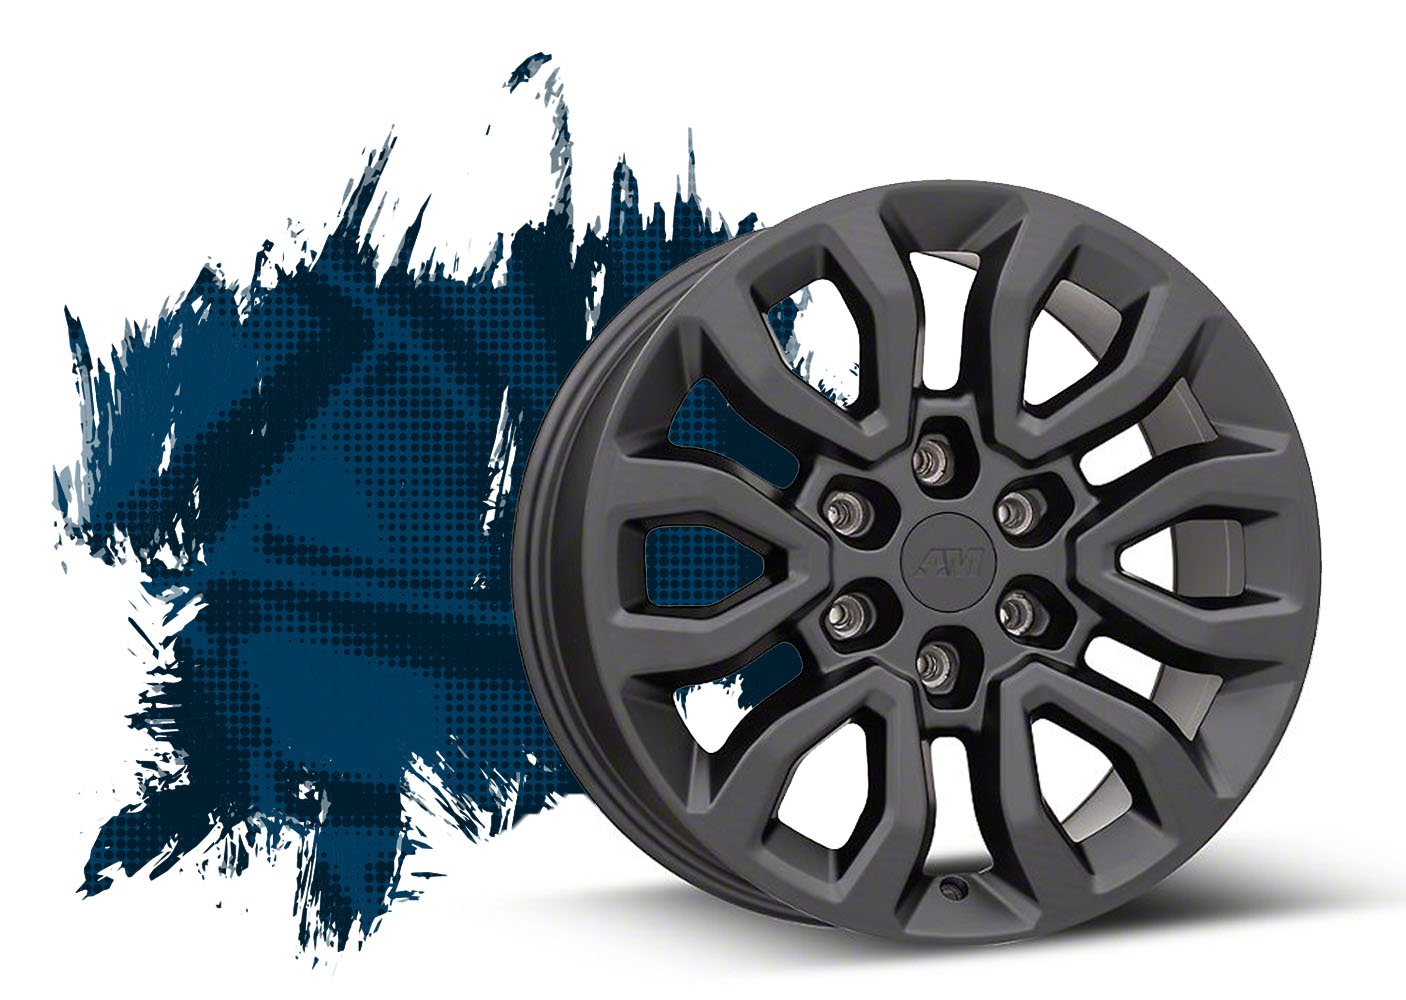 Product image representing the second most popular type of wheel an alloy or aluminum wheel